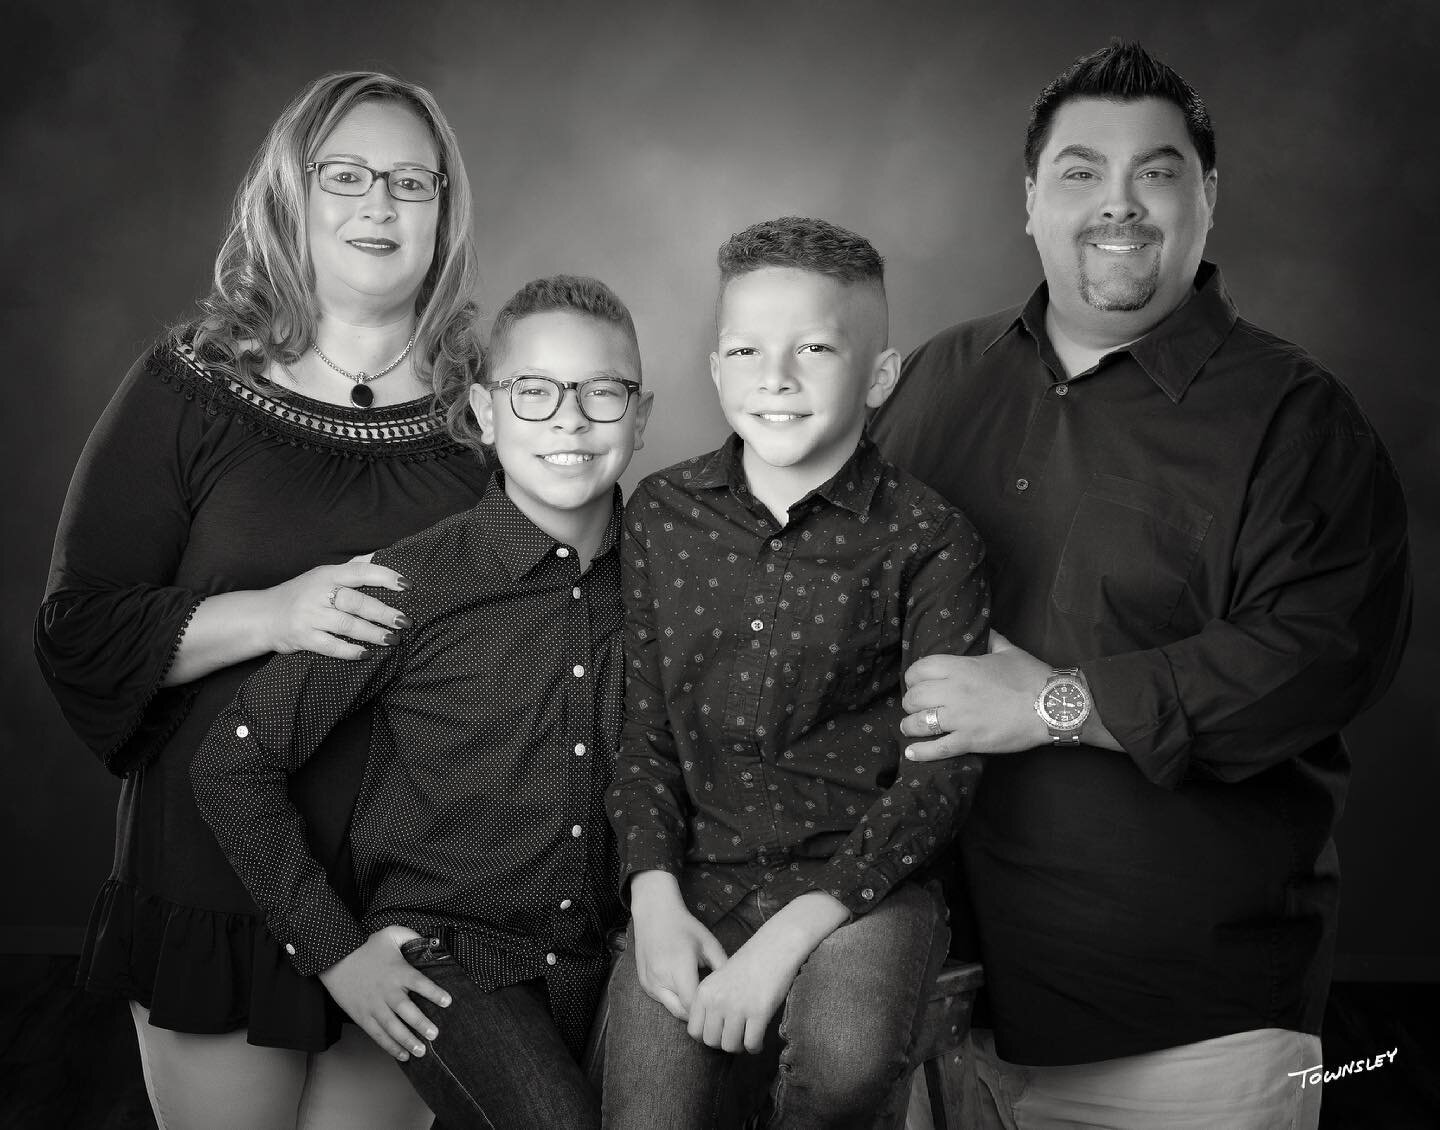 &ldquo;The most important thing in the world is family and love.&rdquo; &ndash;John Wooden 

#townsleyportraits #lasvegas #familyportrait #portraitart